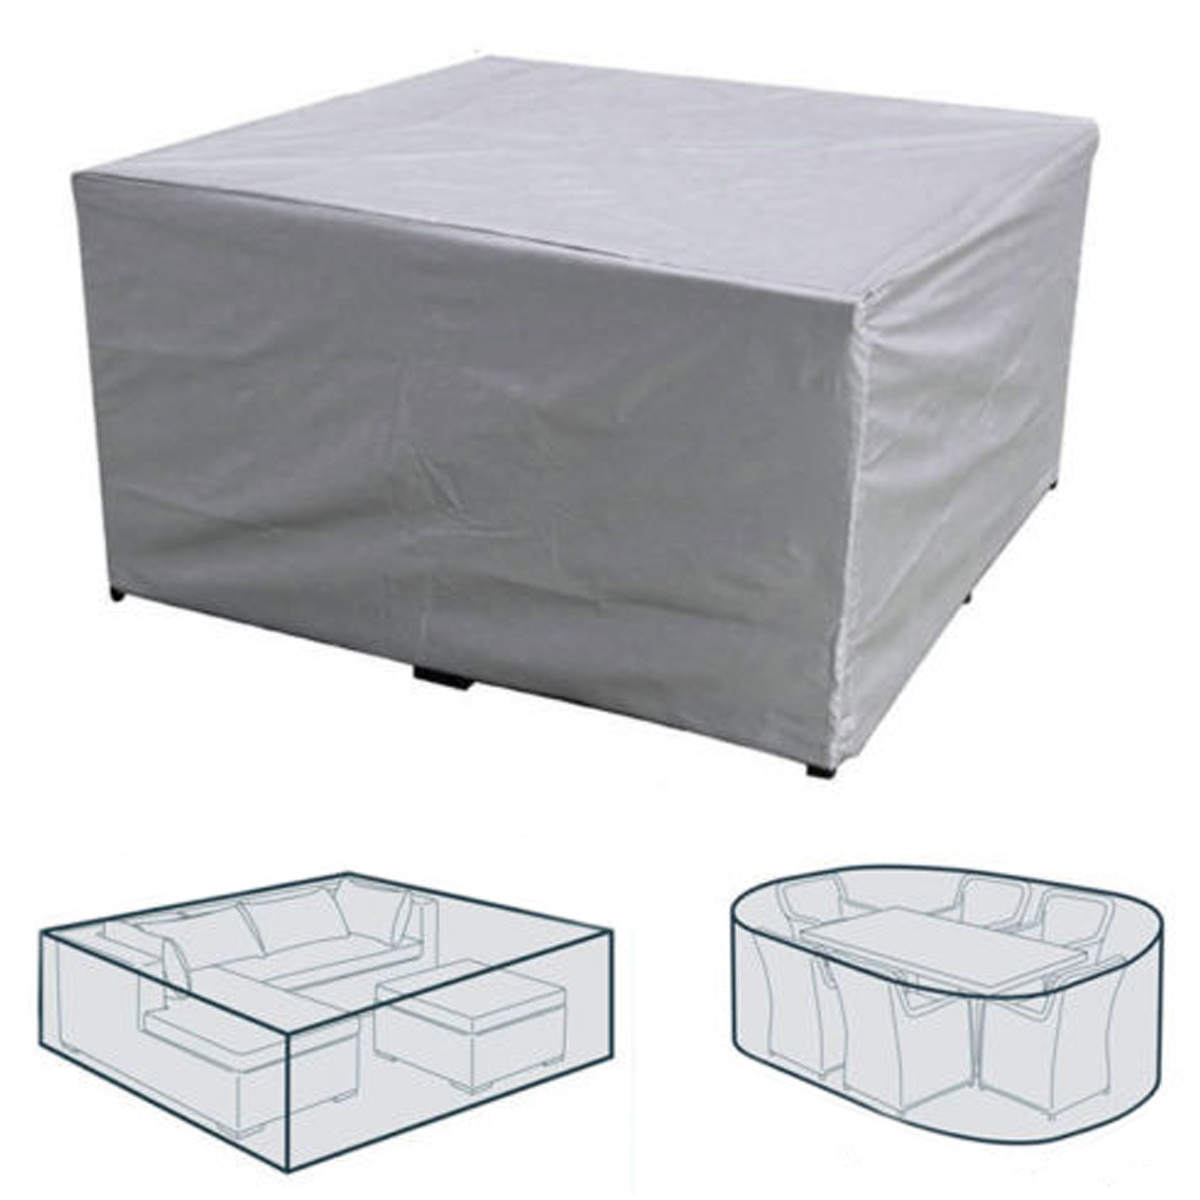 Large-Capacity-Waterproof-Furniture-Table-Sofa-Chair-Cover-Garden-Outdoor-Patio-Protector-1558324-3